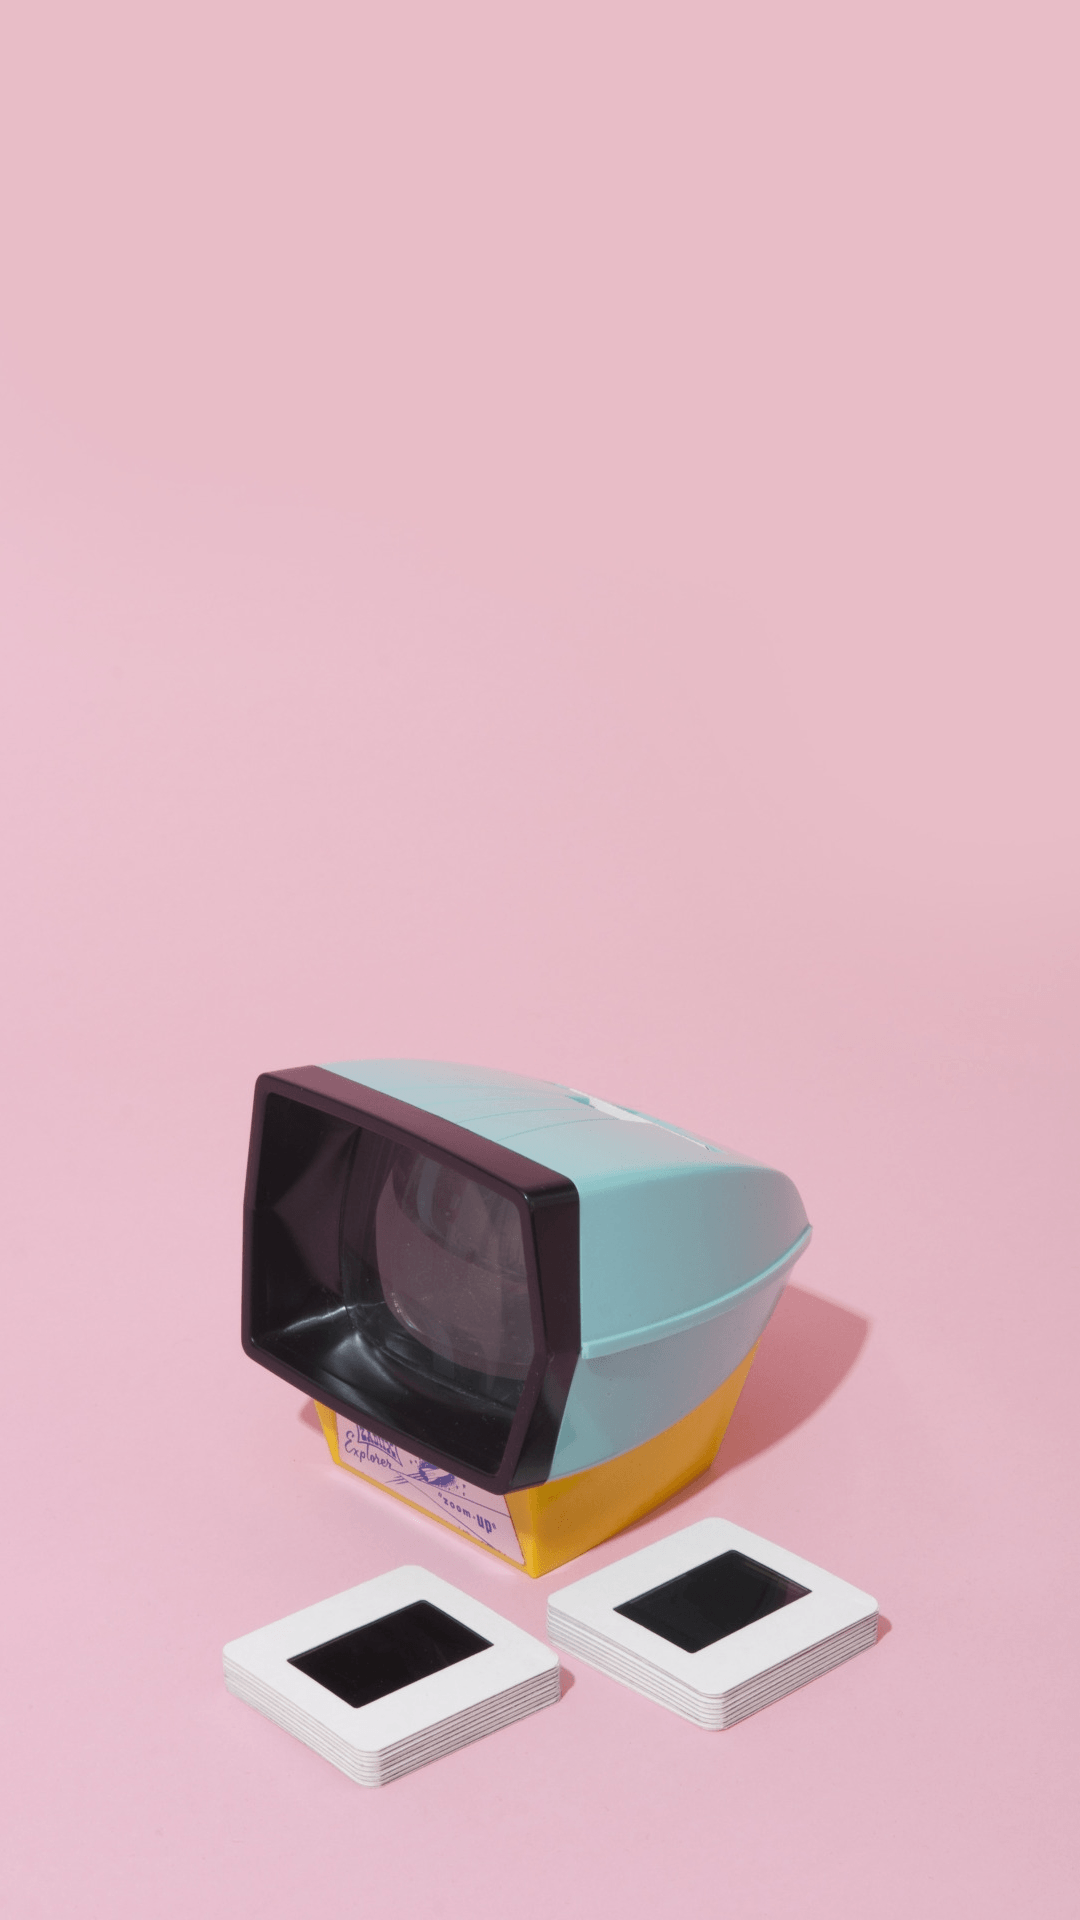 90s Aesthetic Computer Wallpapers - Top Free 90s Aesthetic Computer